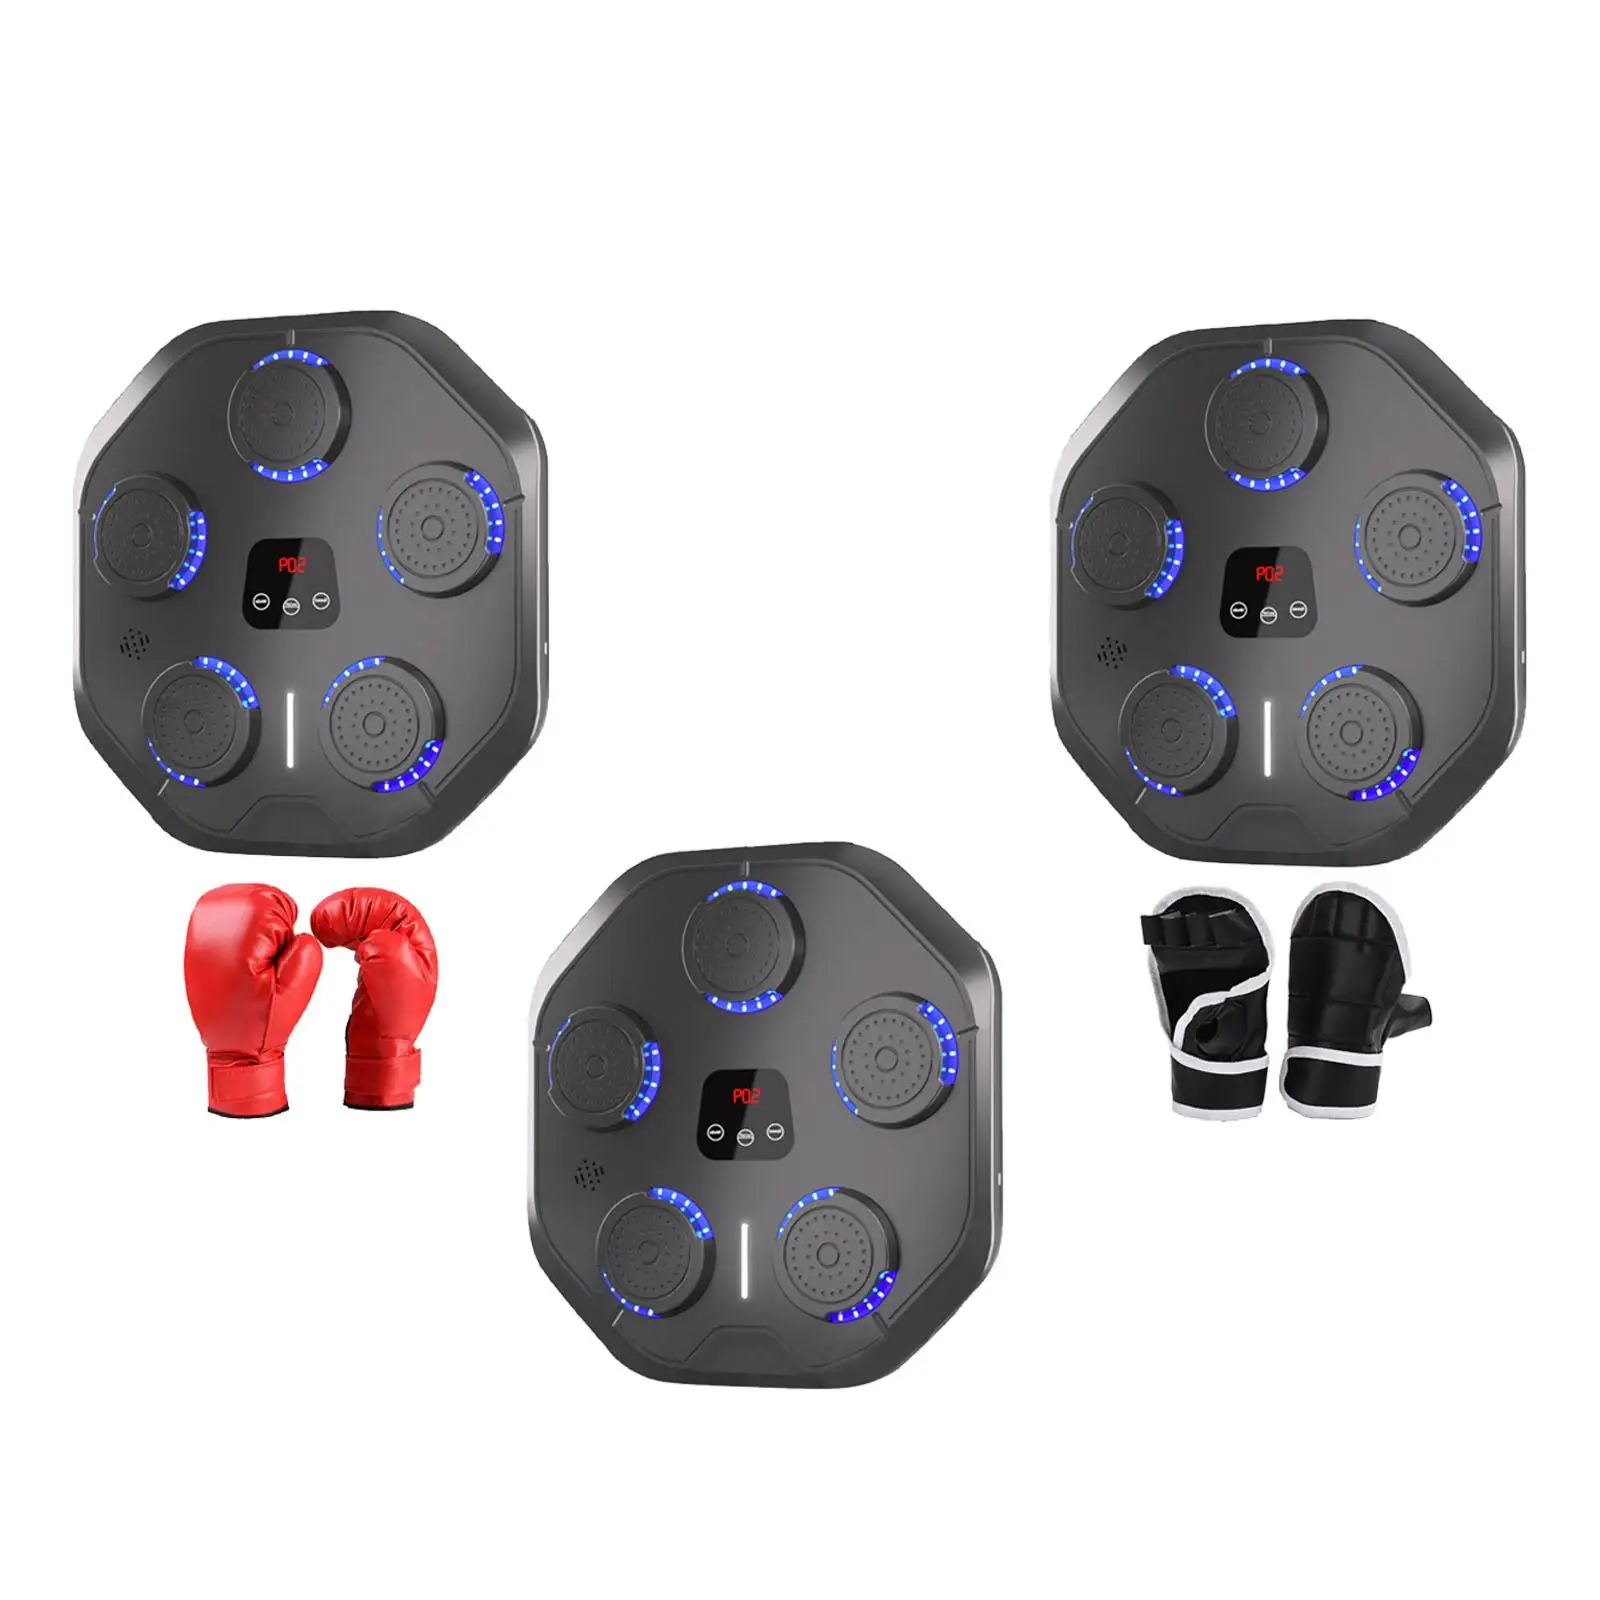 Boxing Machine Wall Mount Electronic Music Boxing Wall Target Rhythm Wall Target for Practice Household Home Gym Kickboxing